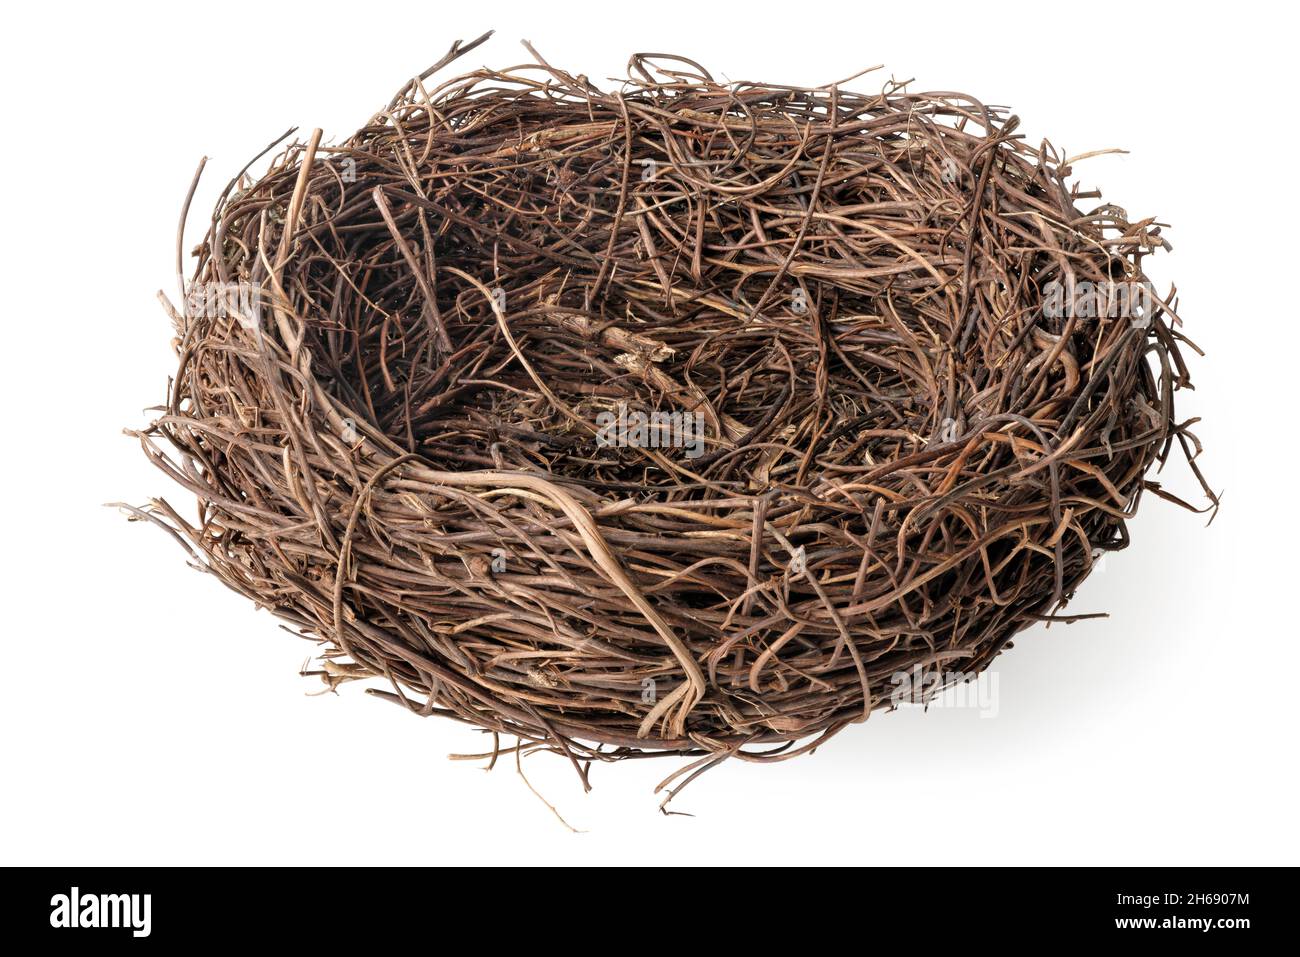 Isolated objects: empty birds nest, side view, on white background Stock Photo